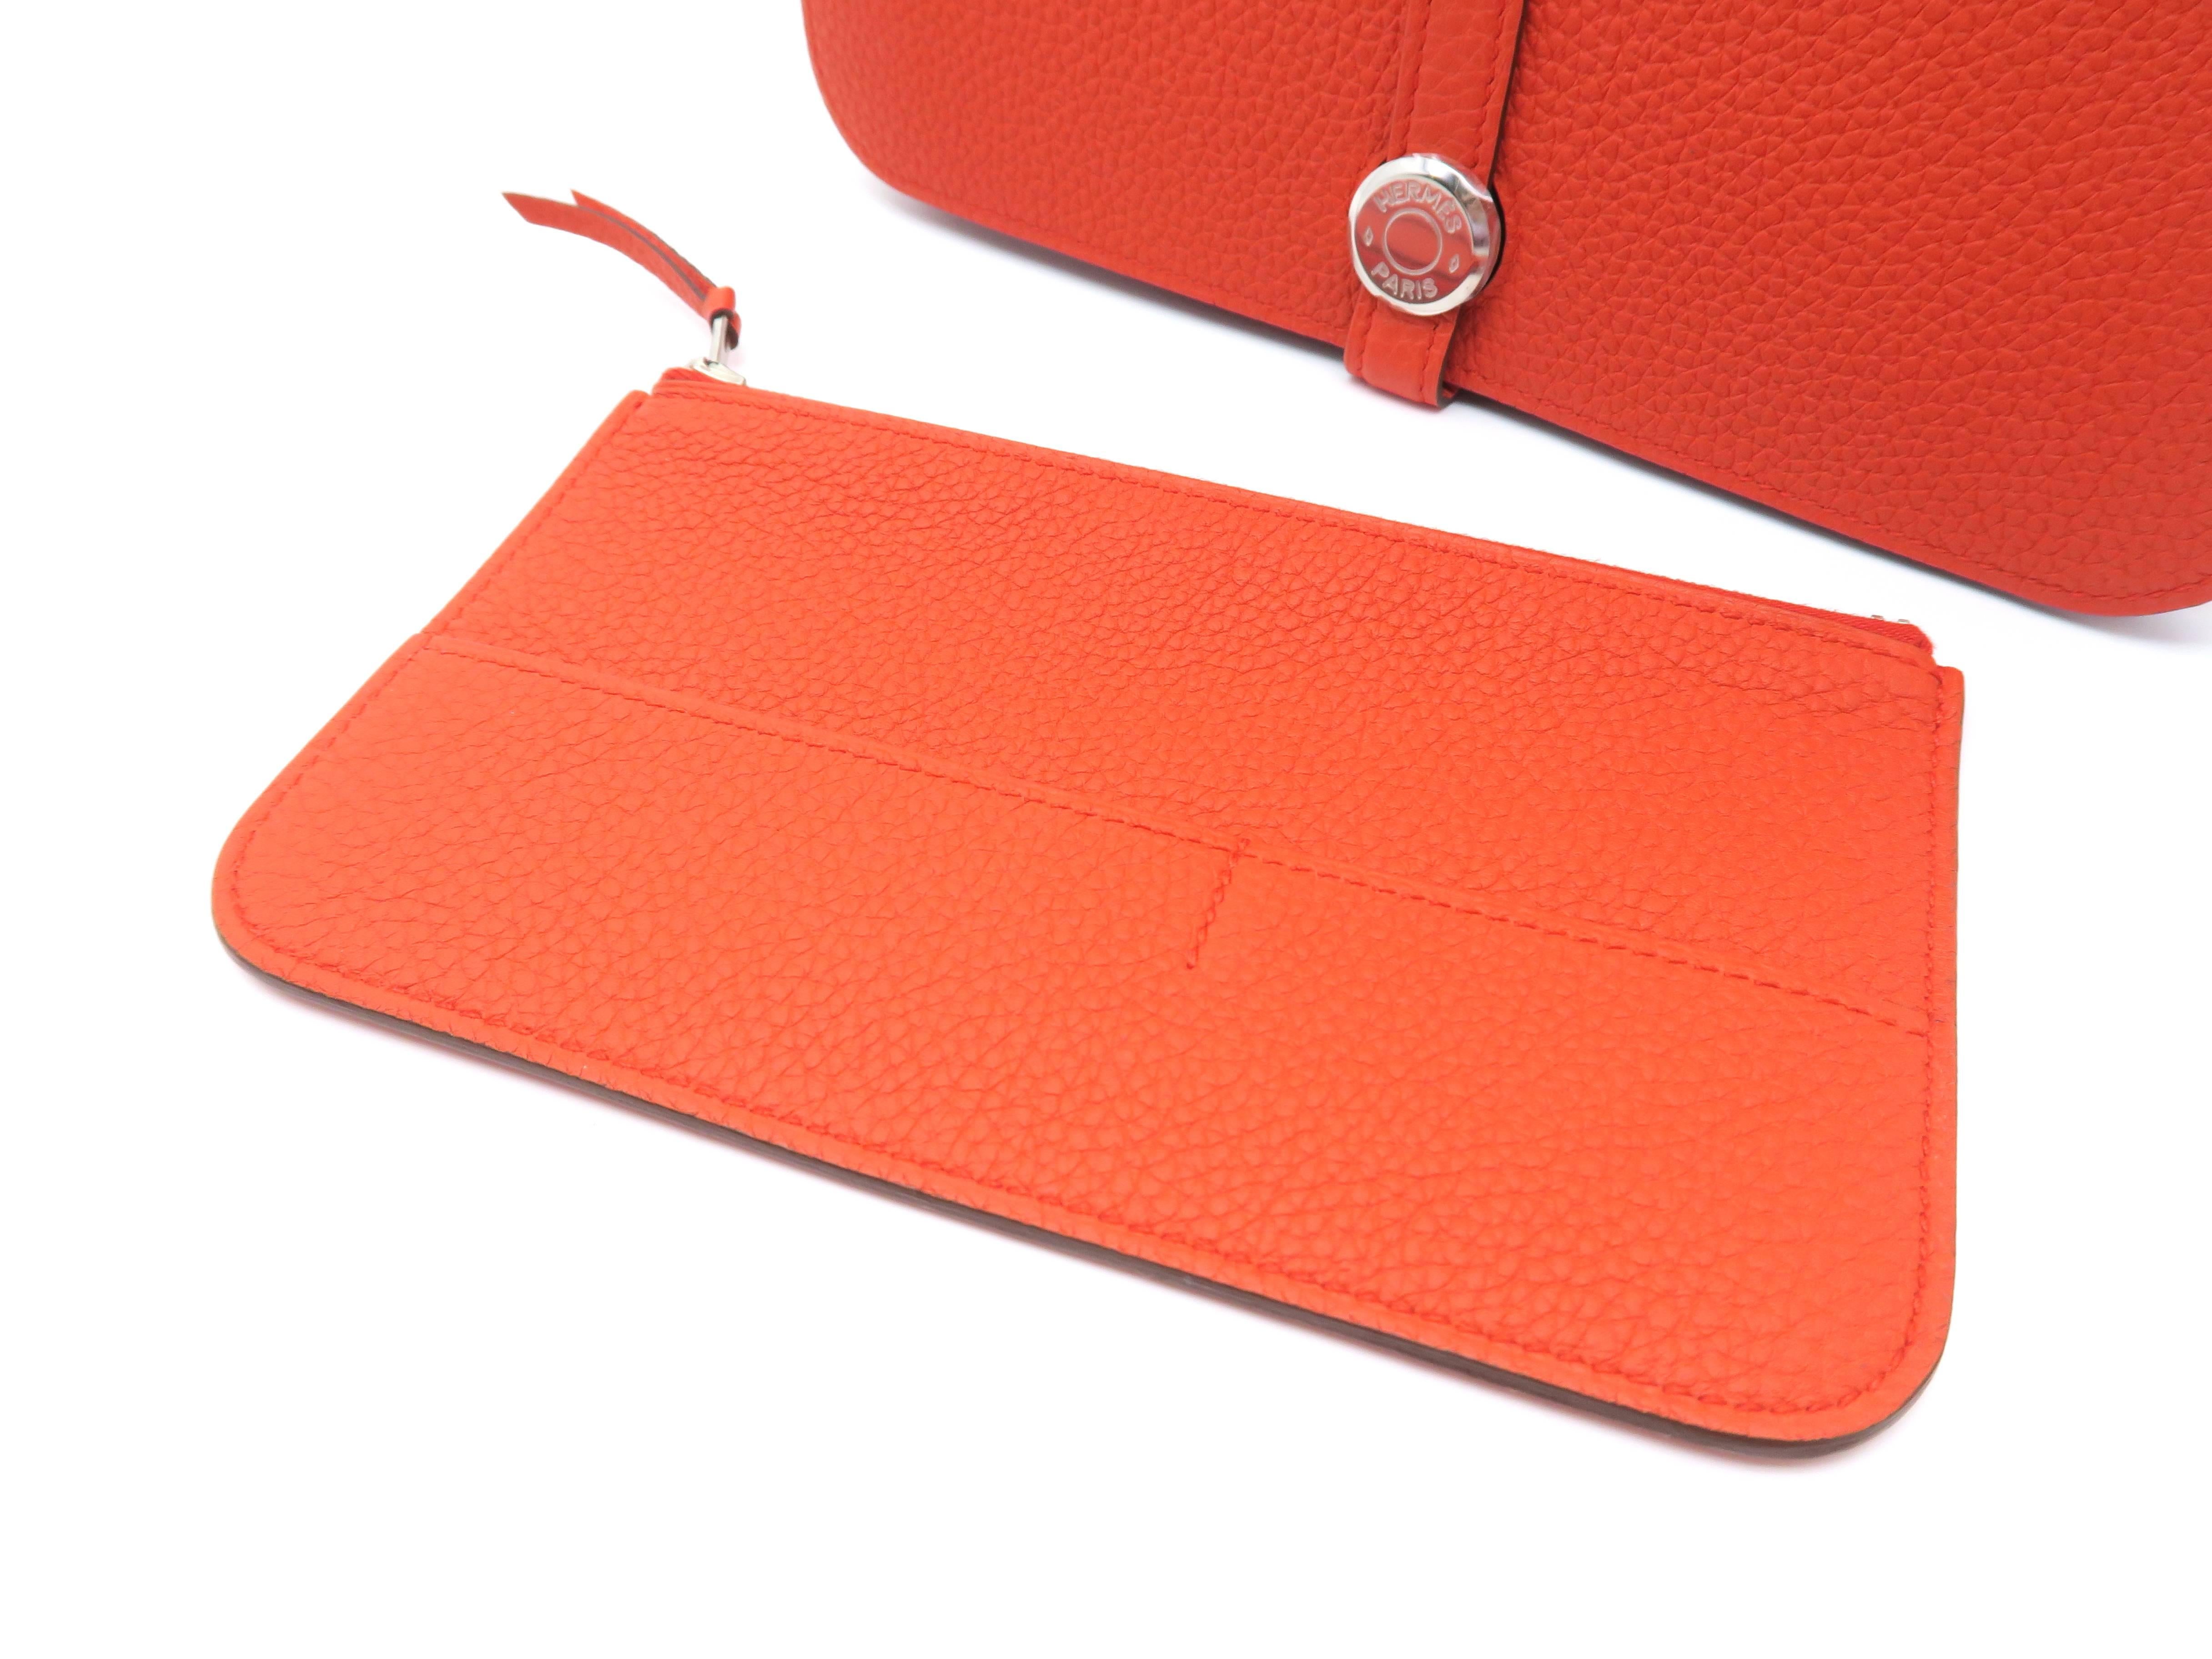 Hermes Dogon GM Orange / Capucine Togo Leather SHW Long Wallet In New Condition For Sale In Kowloon, HK